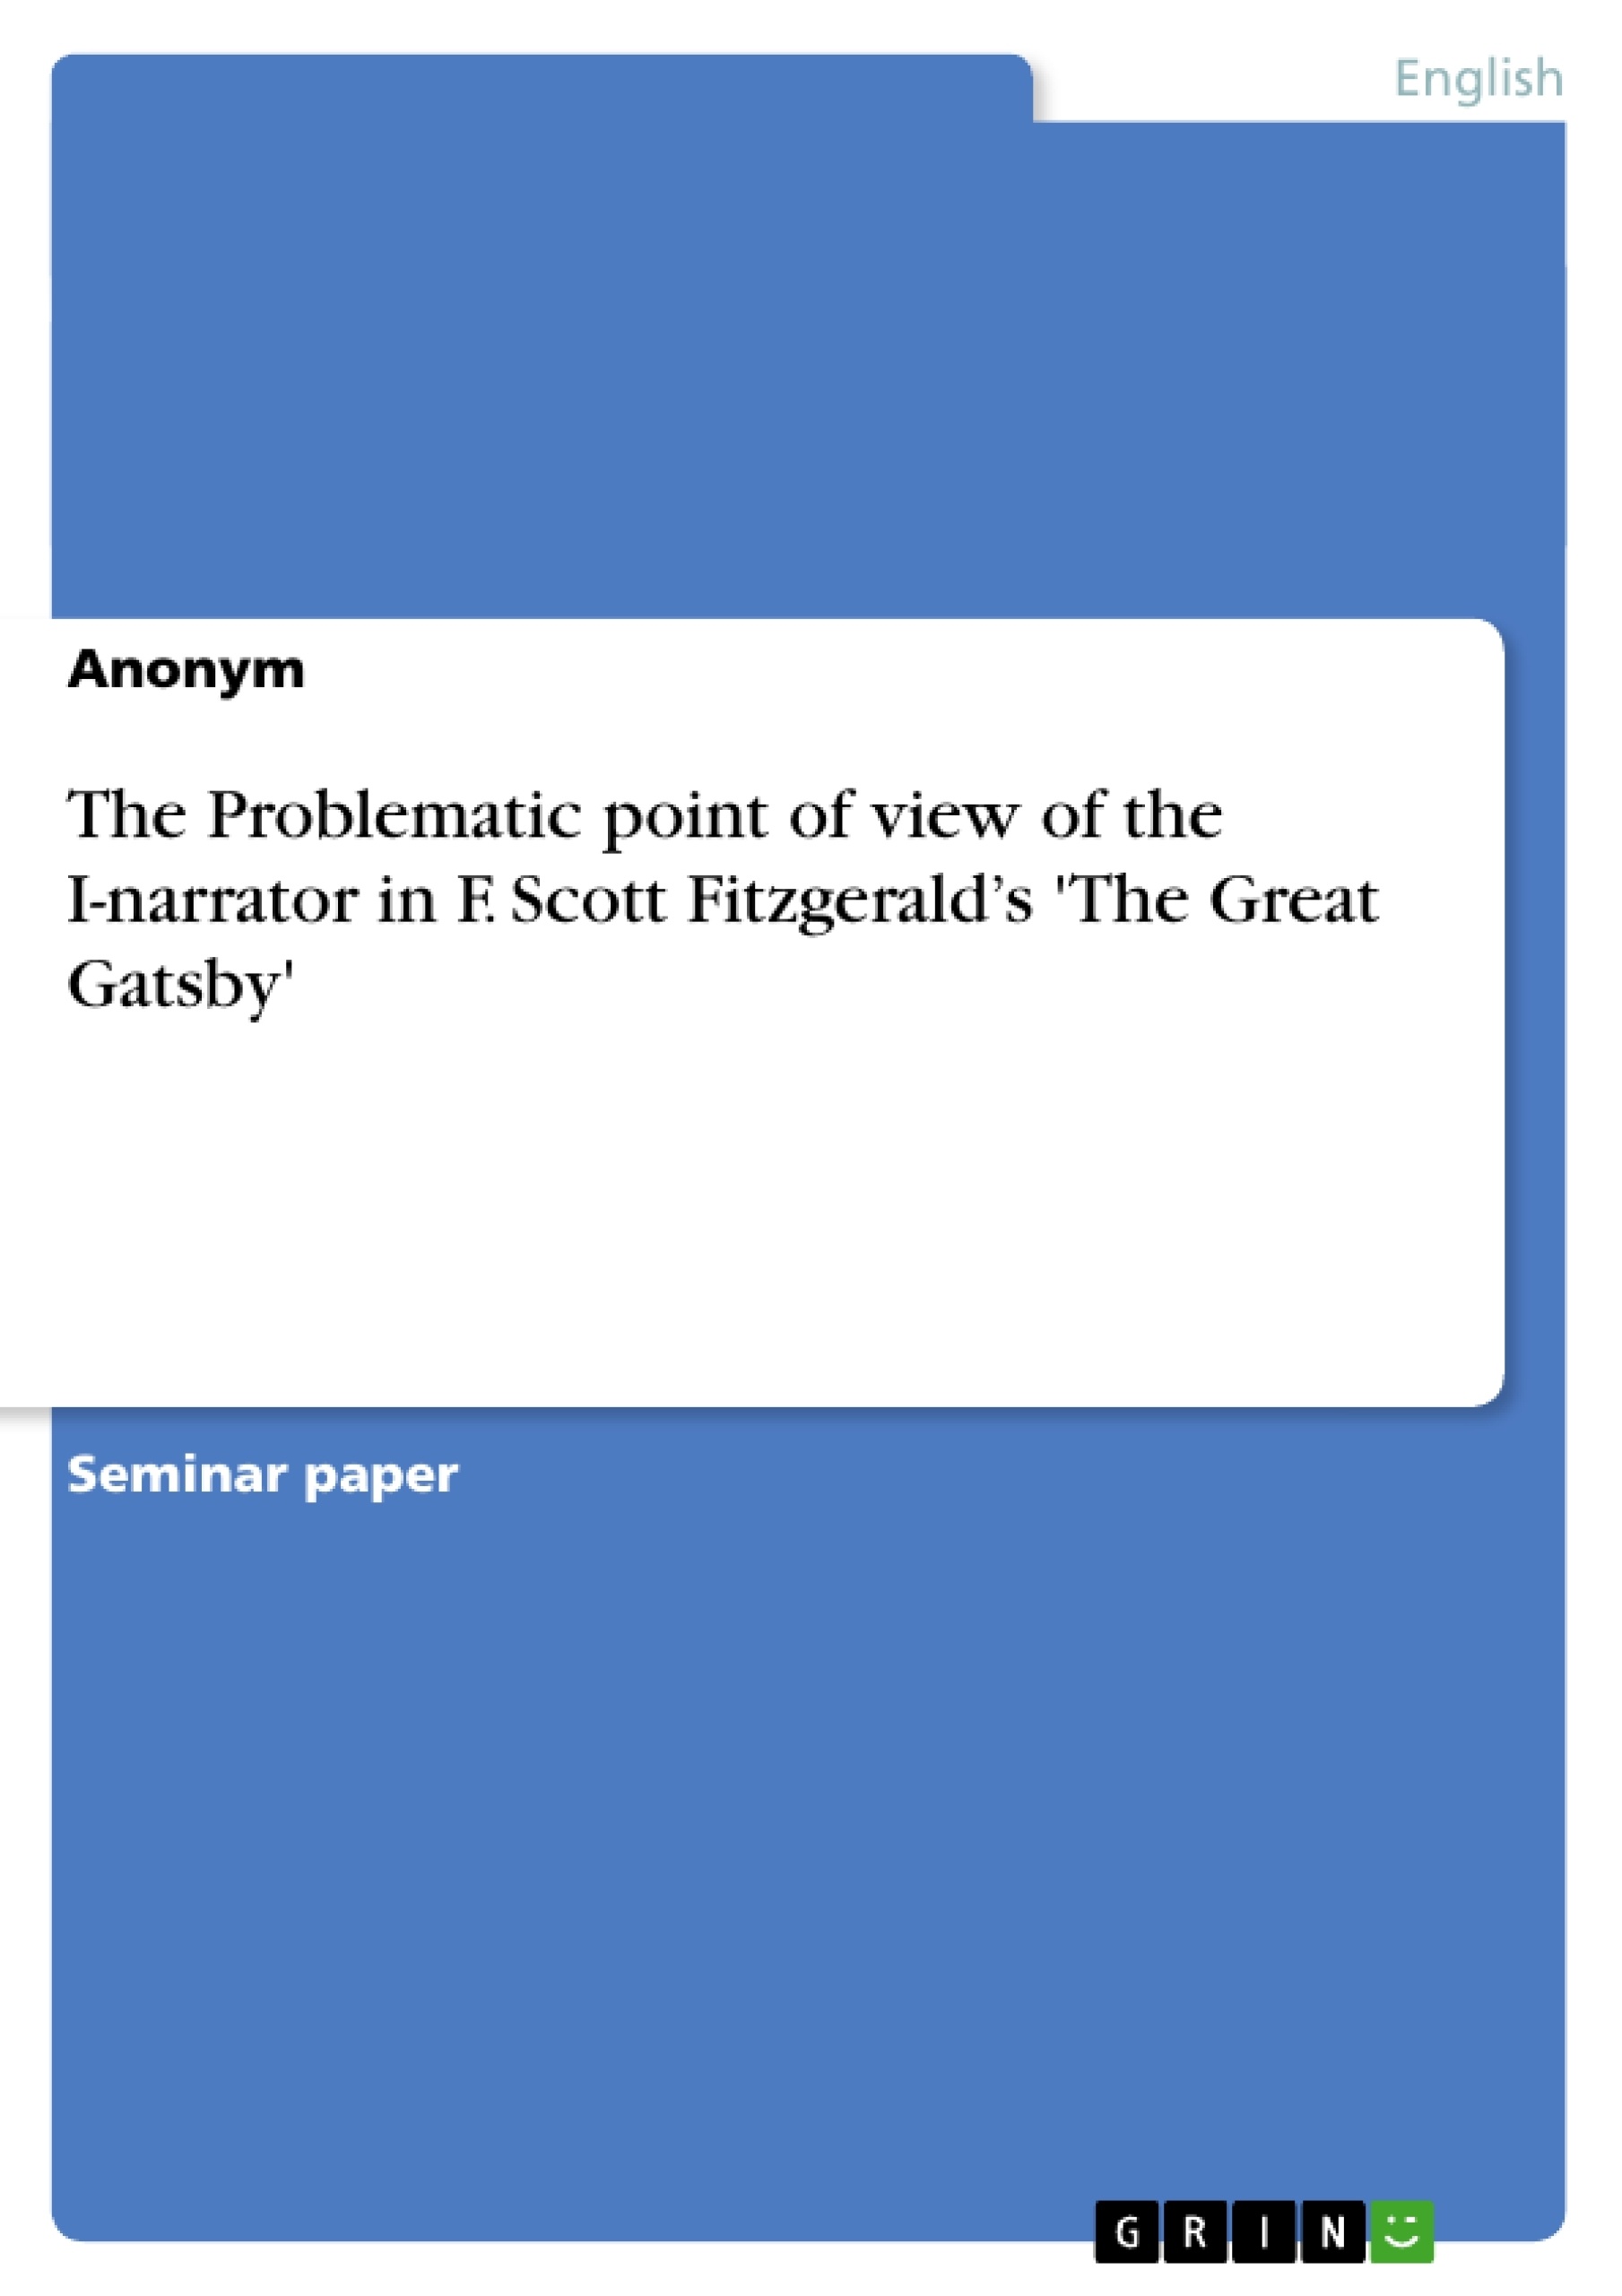 Title: The Problematic point of view of the I-narrator in F. Scott Fitzgerald’s 'The Great Gatsby'